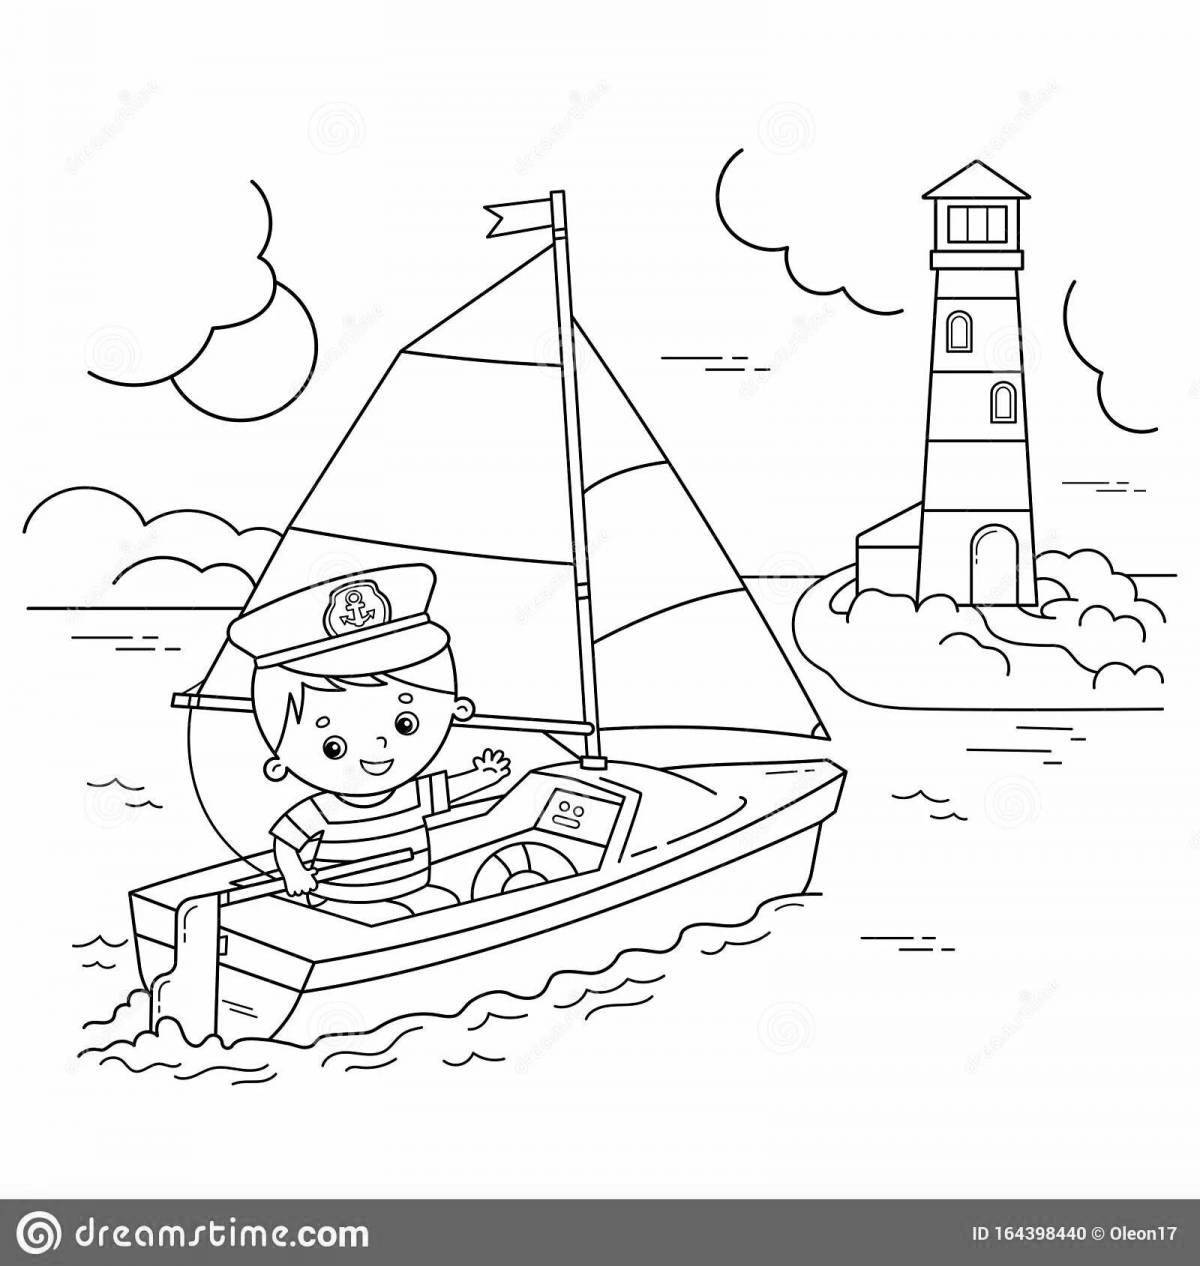 Colorful house coloring page for kids